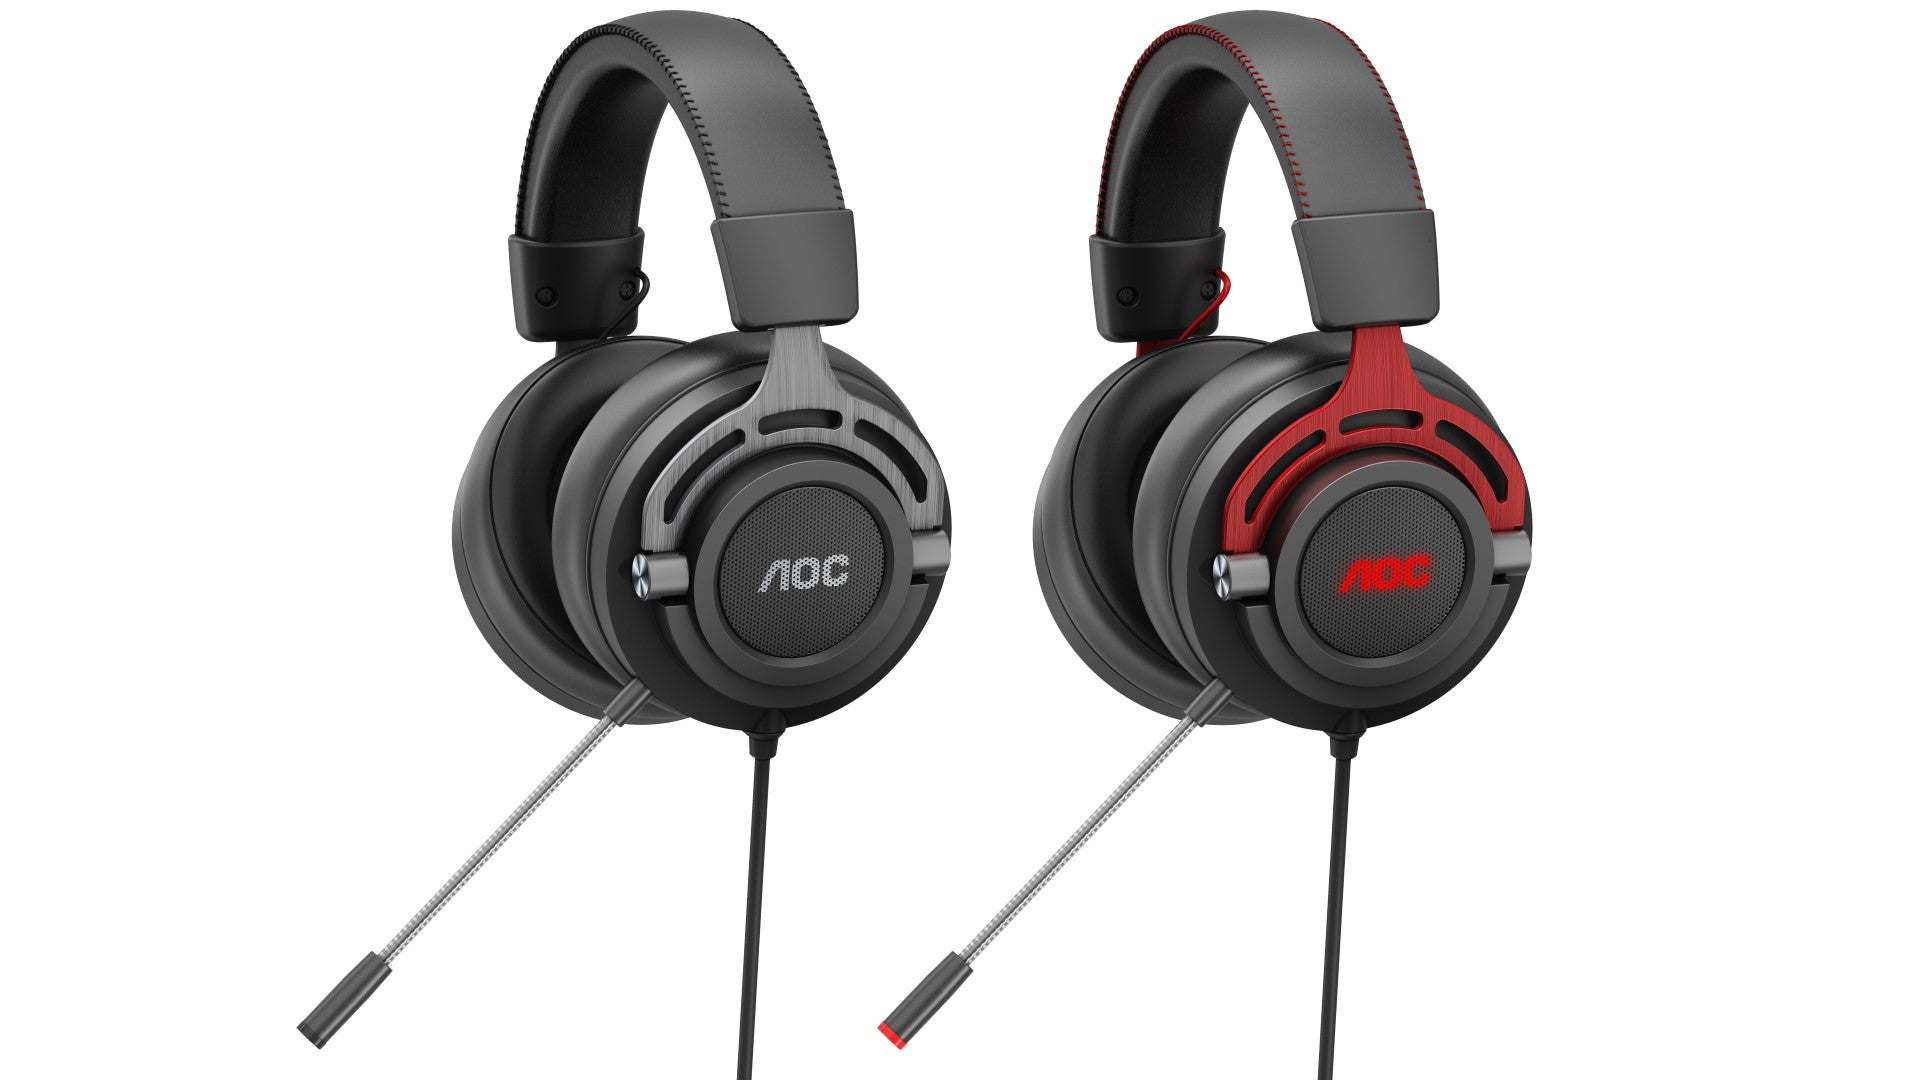 AOC's GH200 and GH300 gaming headsets